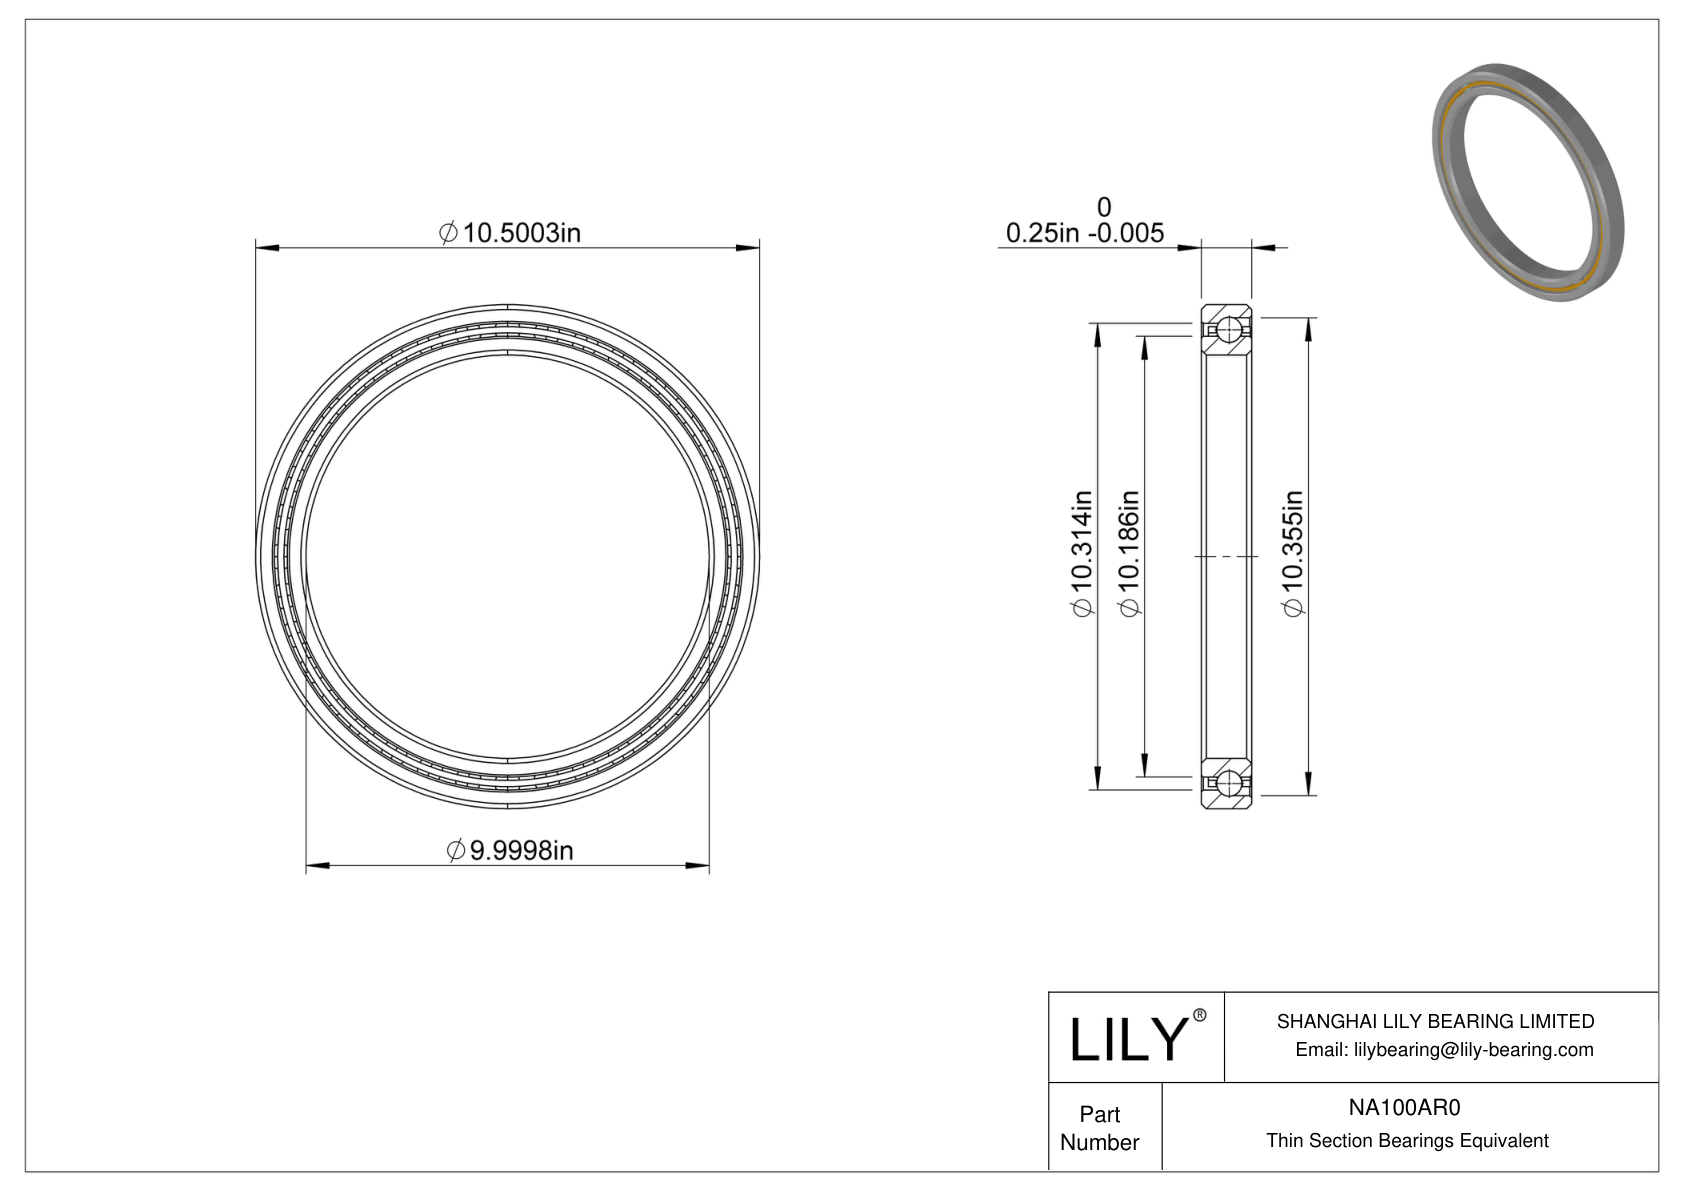 NA100AR0 Constant Section (CS) Bearings cad drawing